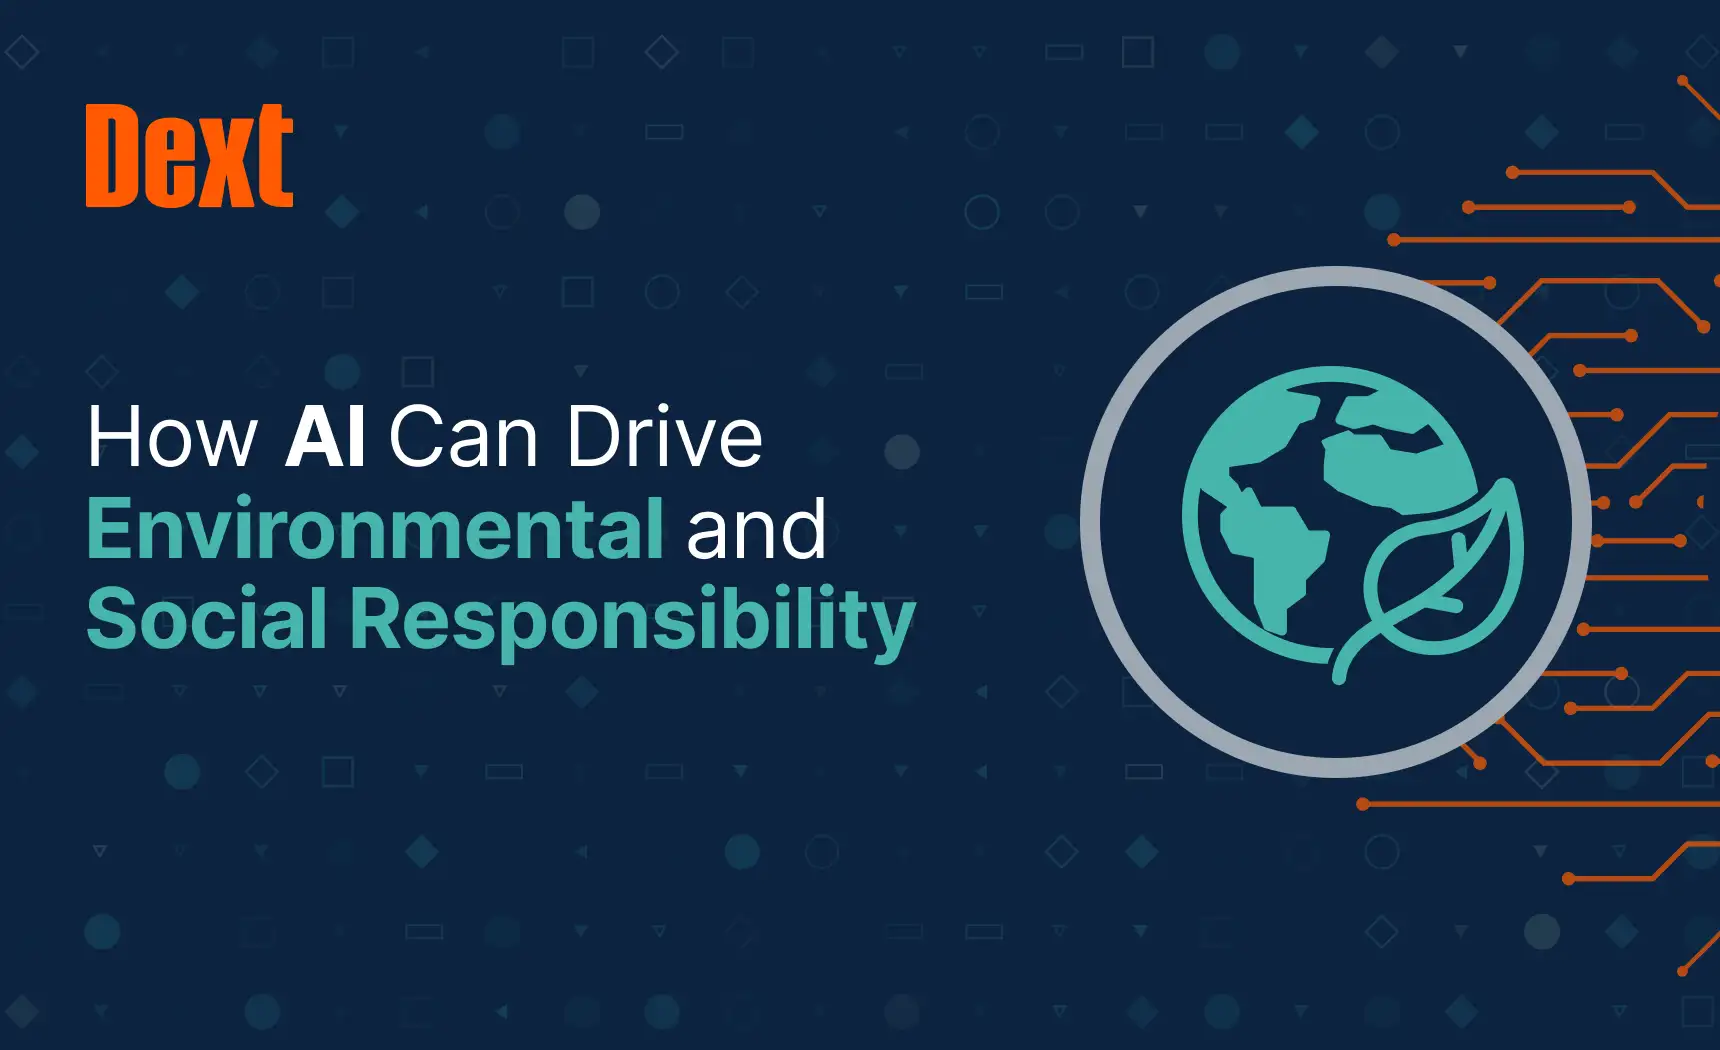 Dext: How AI Can Drive Environmental and Social Responsibility image